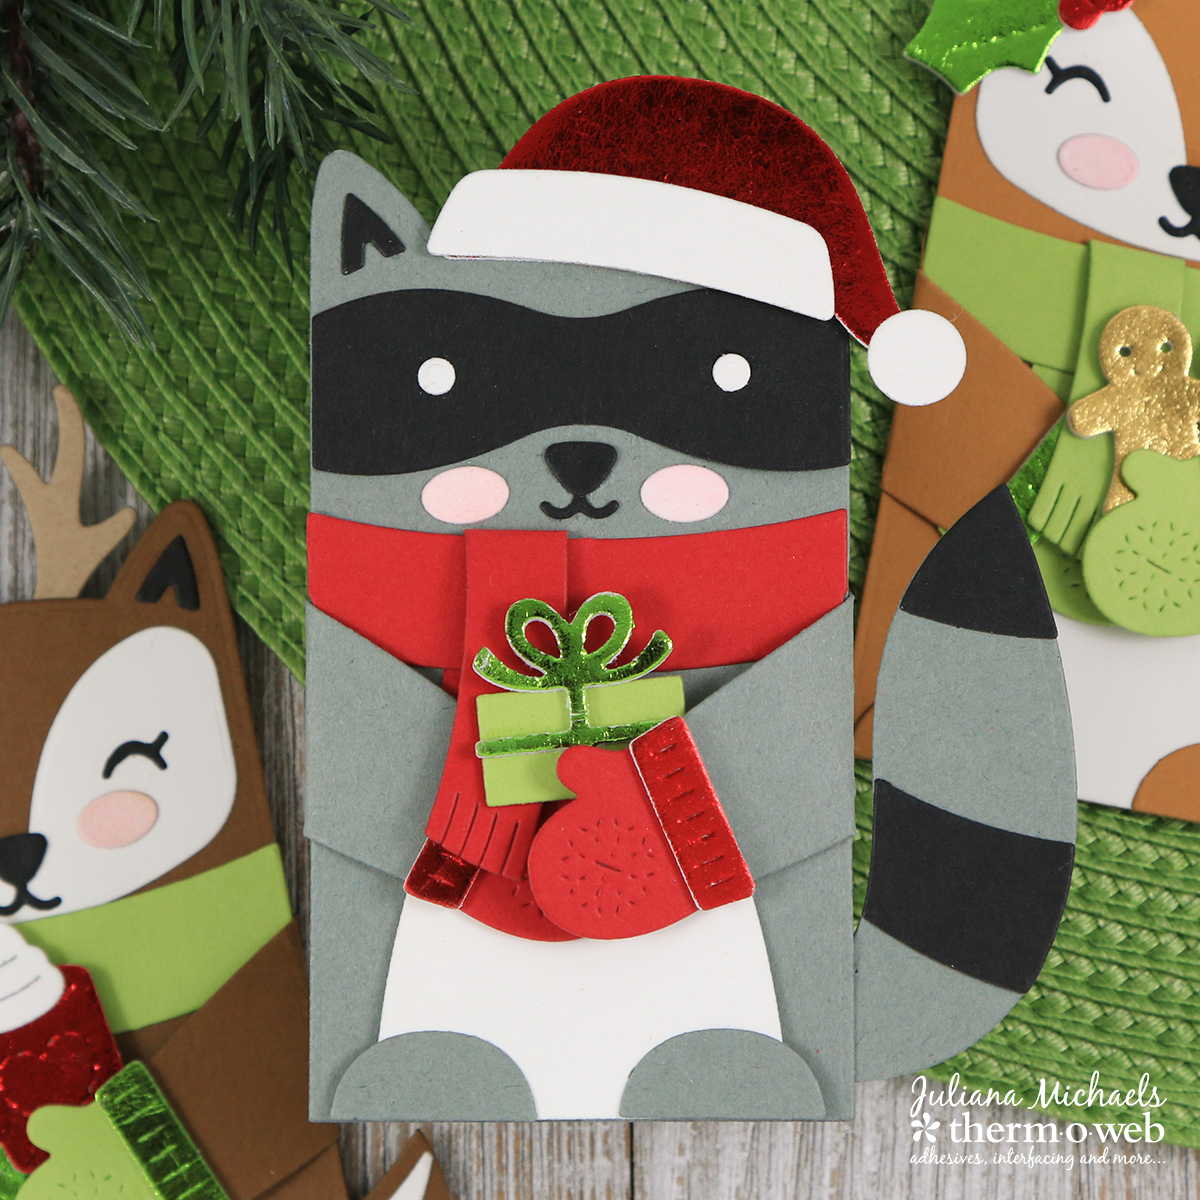 Raccoon Woodland Critters Huggers Holiday Gift Card Holder by Juliana Michaels featuring Lawn Fawn and Therm O Web DecoFoil